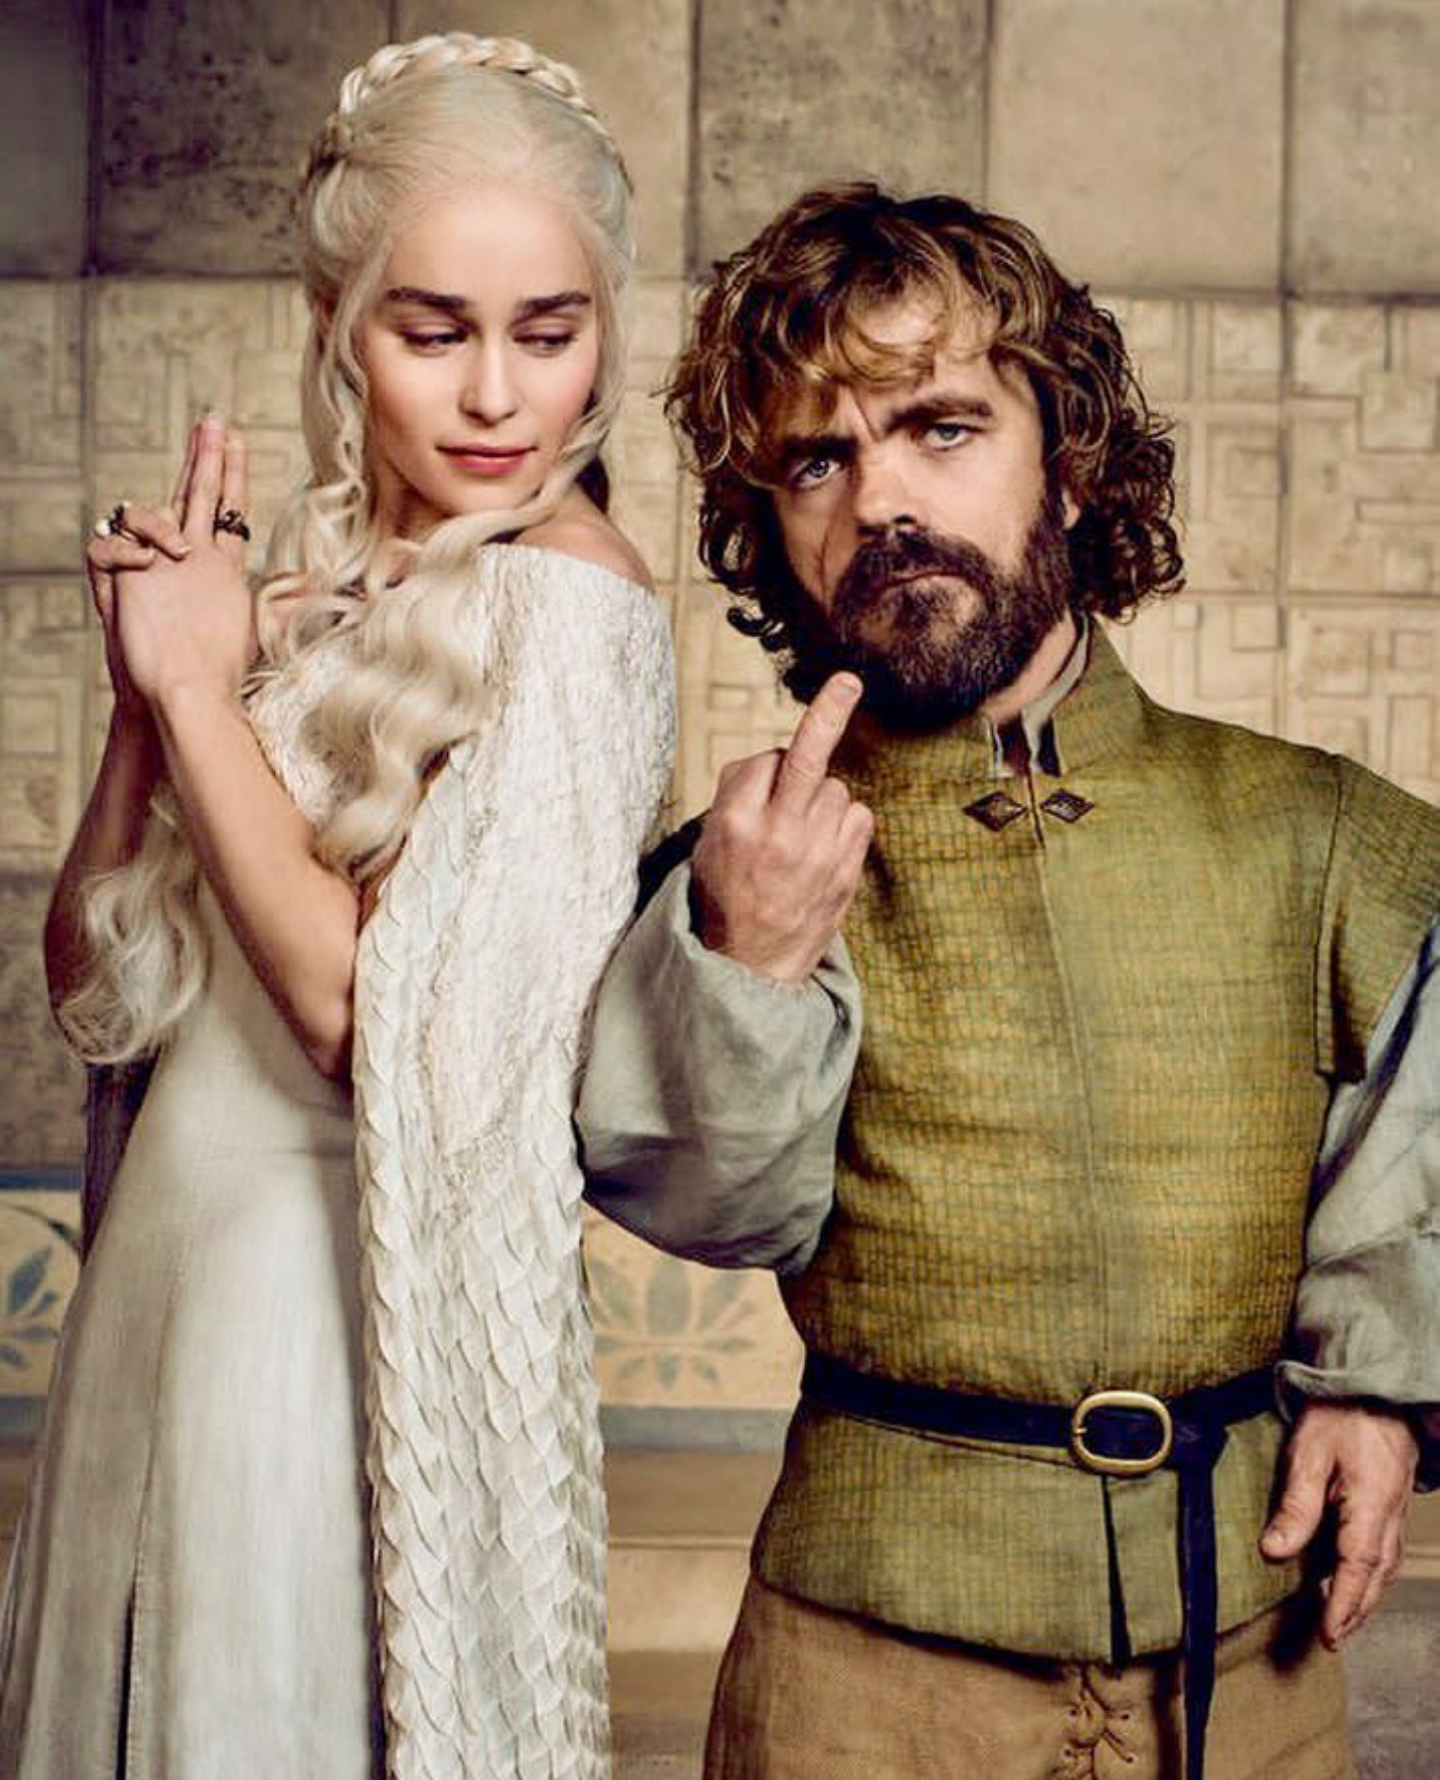 To all Game of Thrones haters: - Game of Thrones, Haters, Peter Dinklage, Tyrion Lannister, Emilia Clarke, Daenerys Targaryen